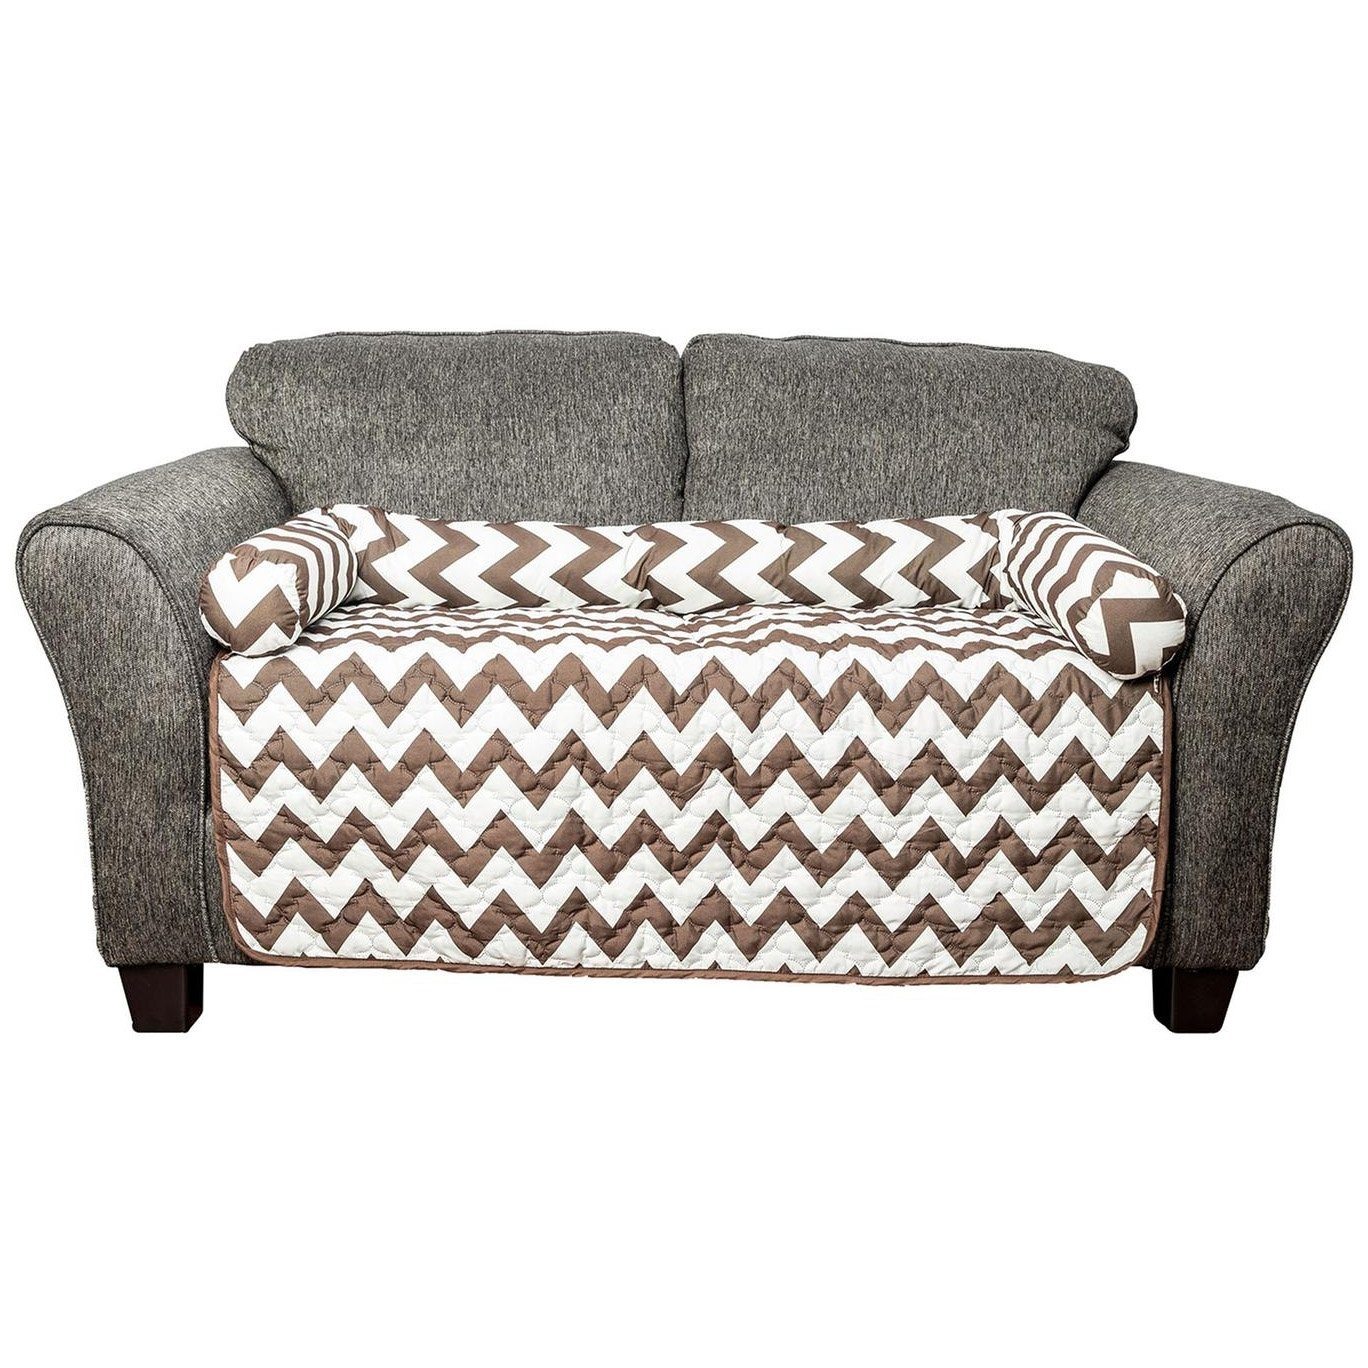 Chevron Reversible Quilted Pet Bed Chair Cover - Assorted Sizes / Brown / Large